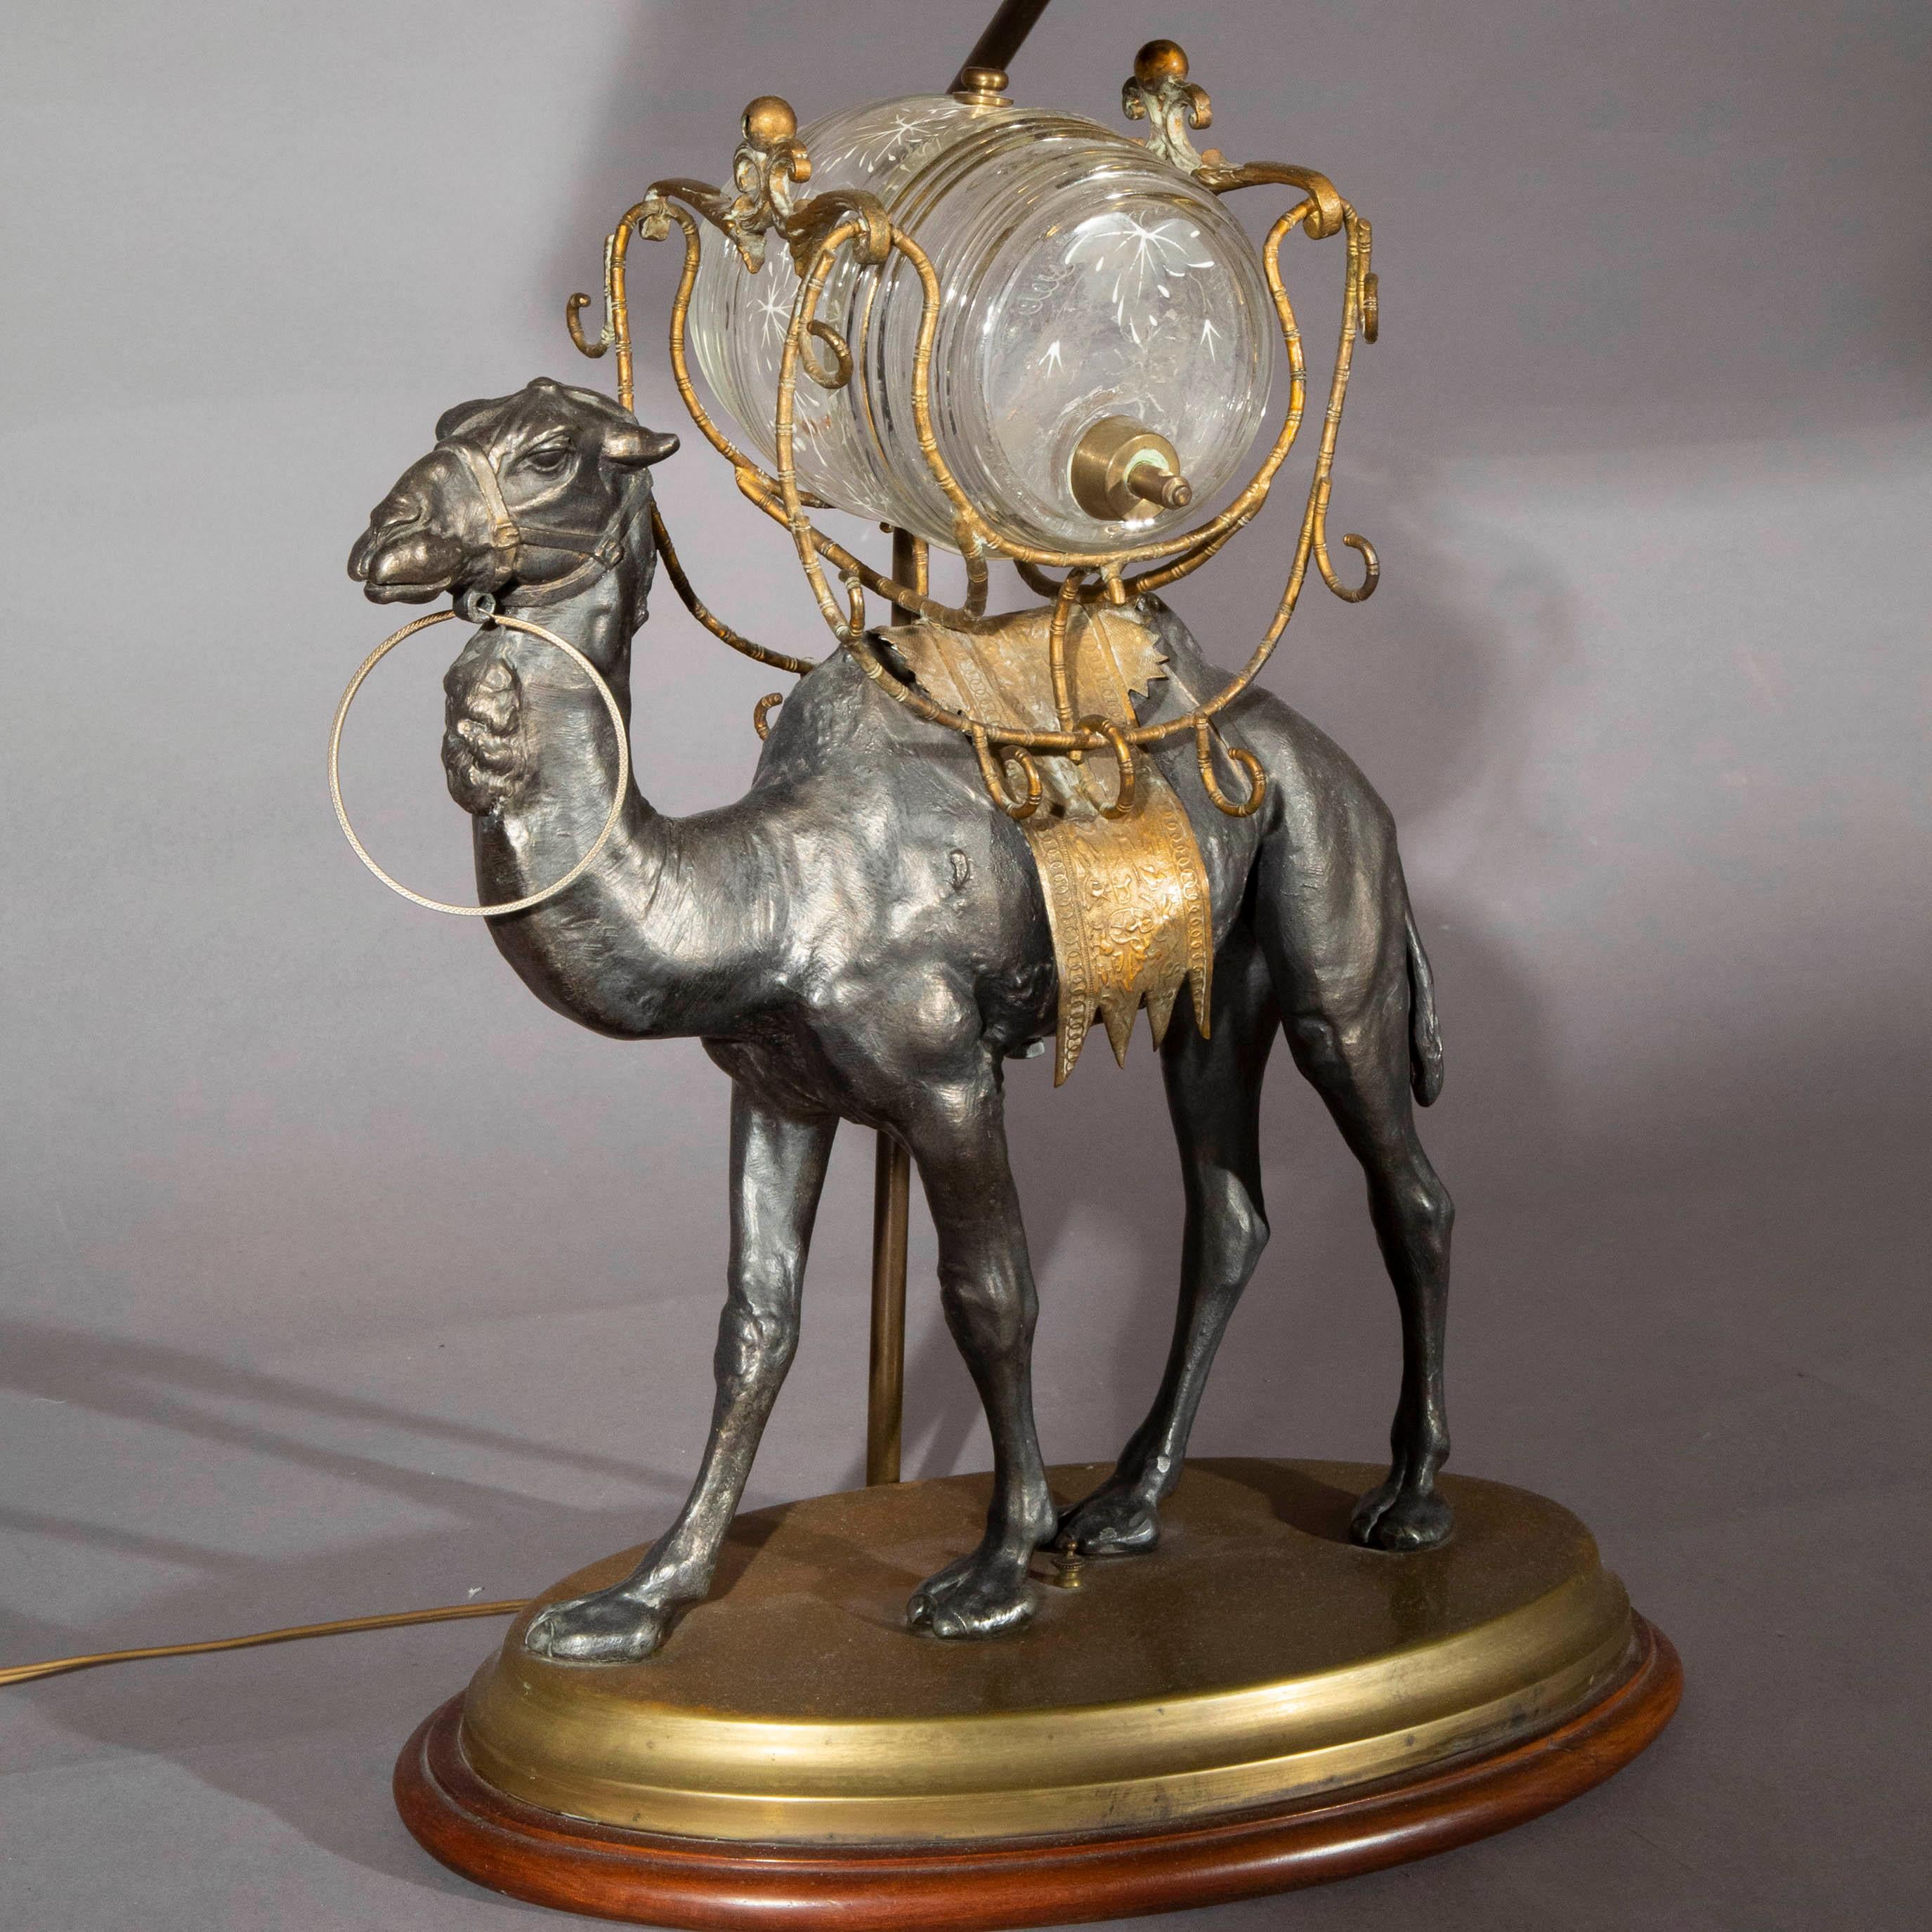 French Antique Camel Table Lamp with Gilded Shade, 19th Century